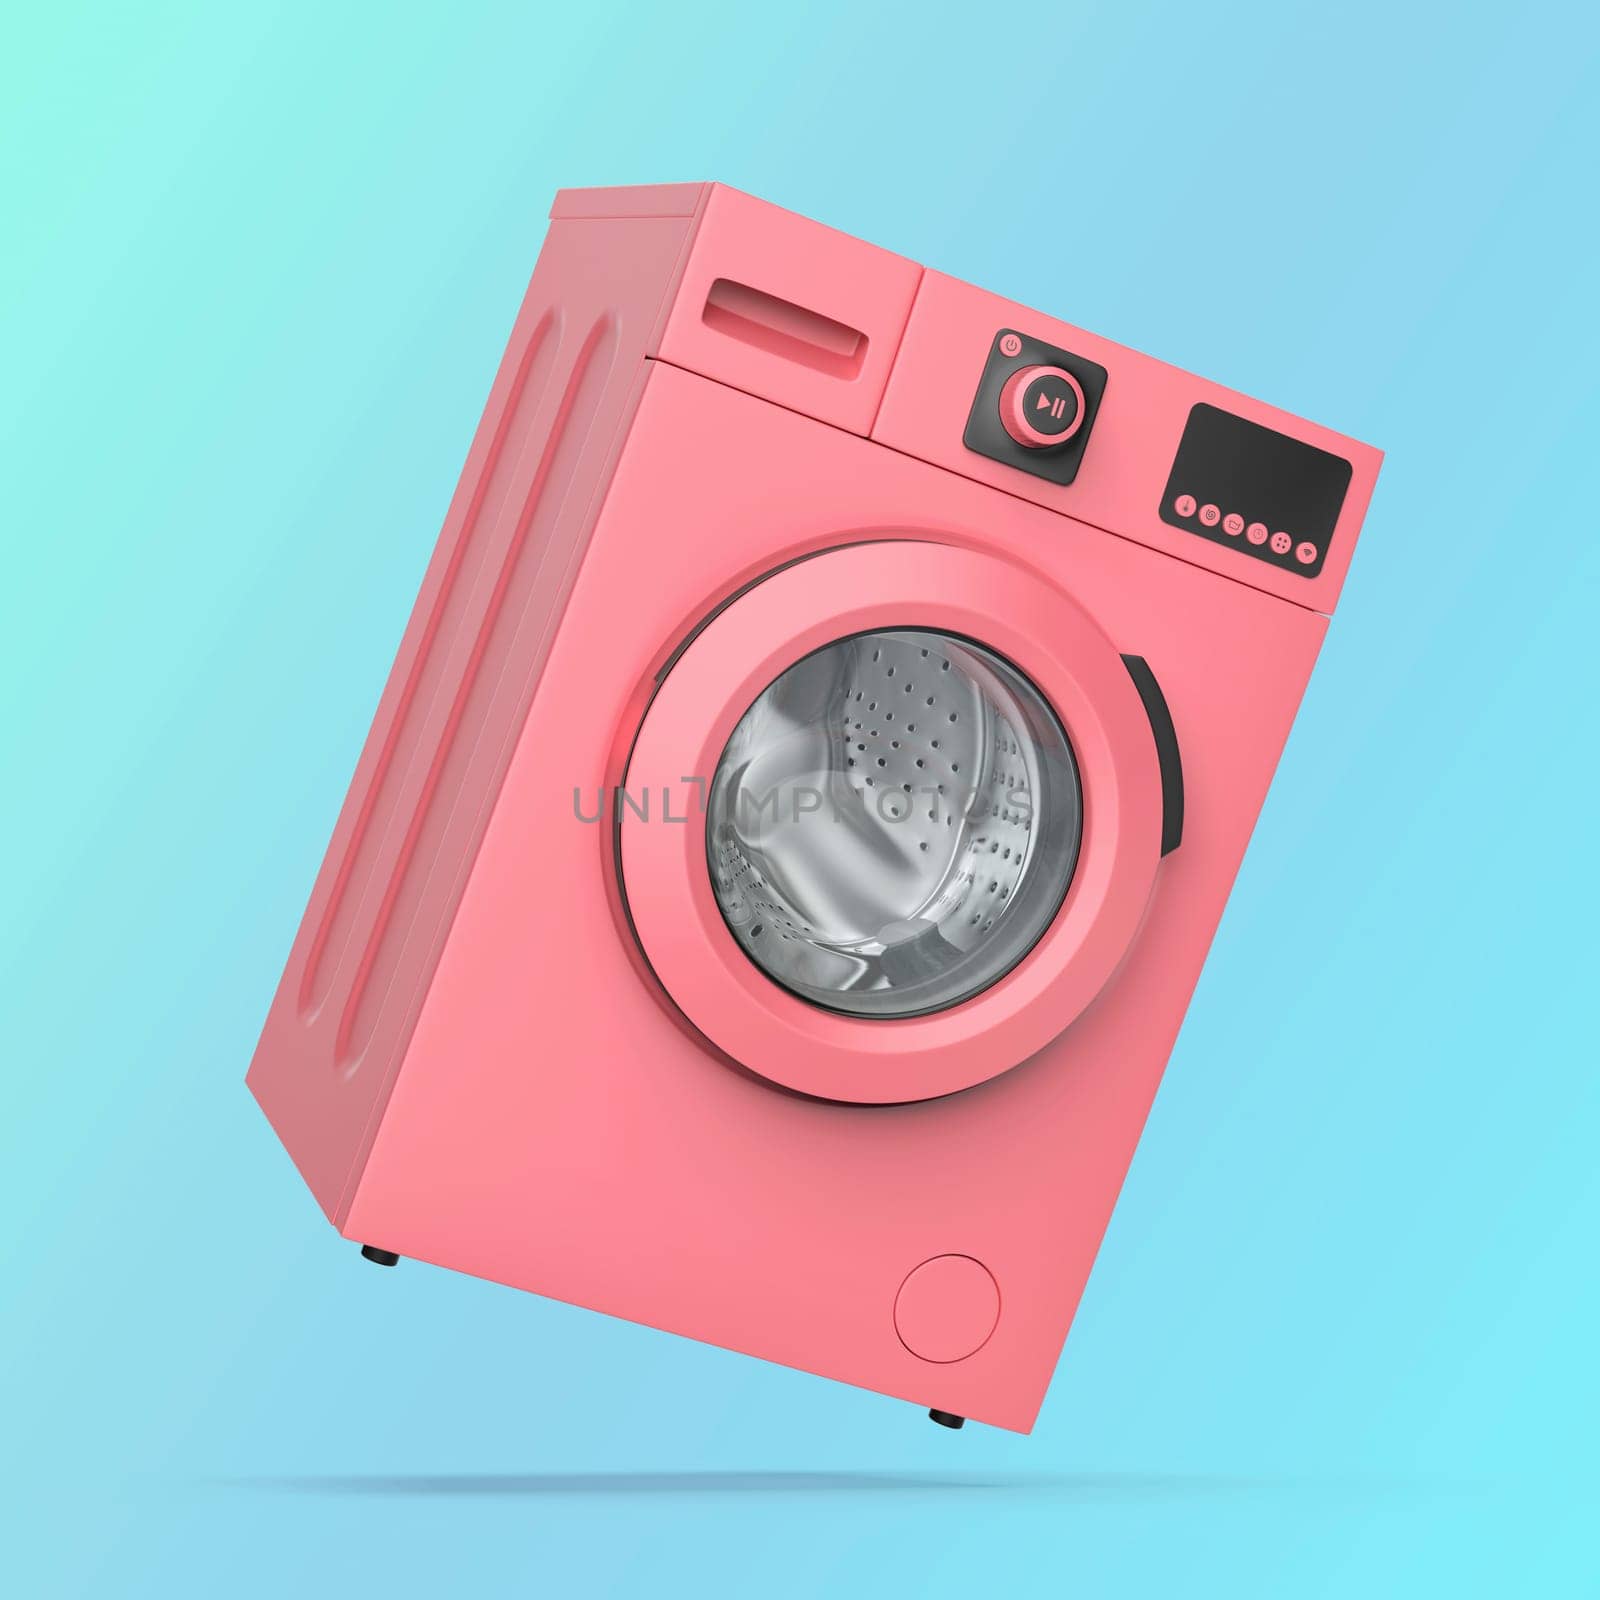 Pink washing machine on blue background
 by magraphics